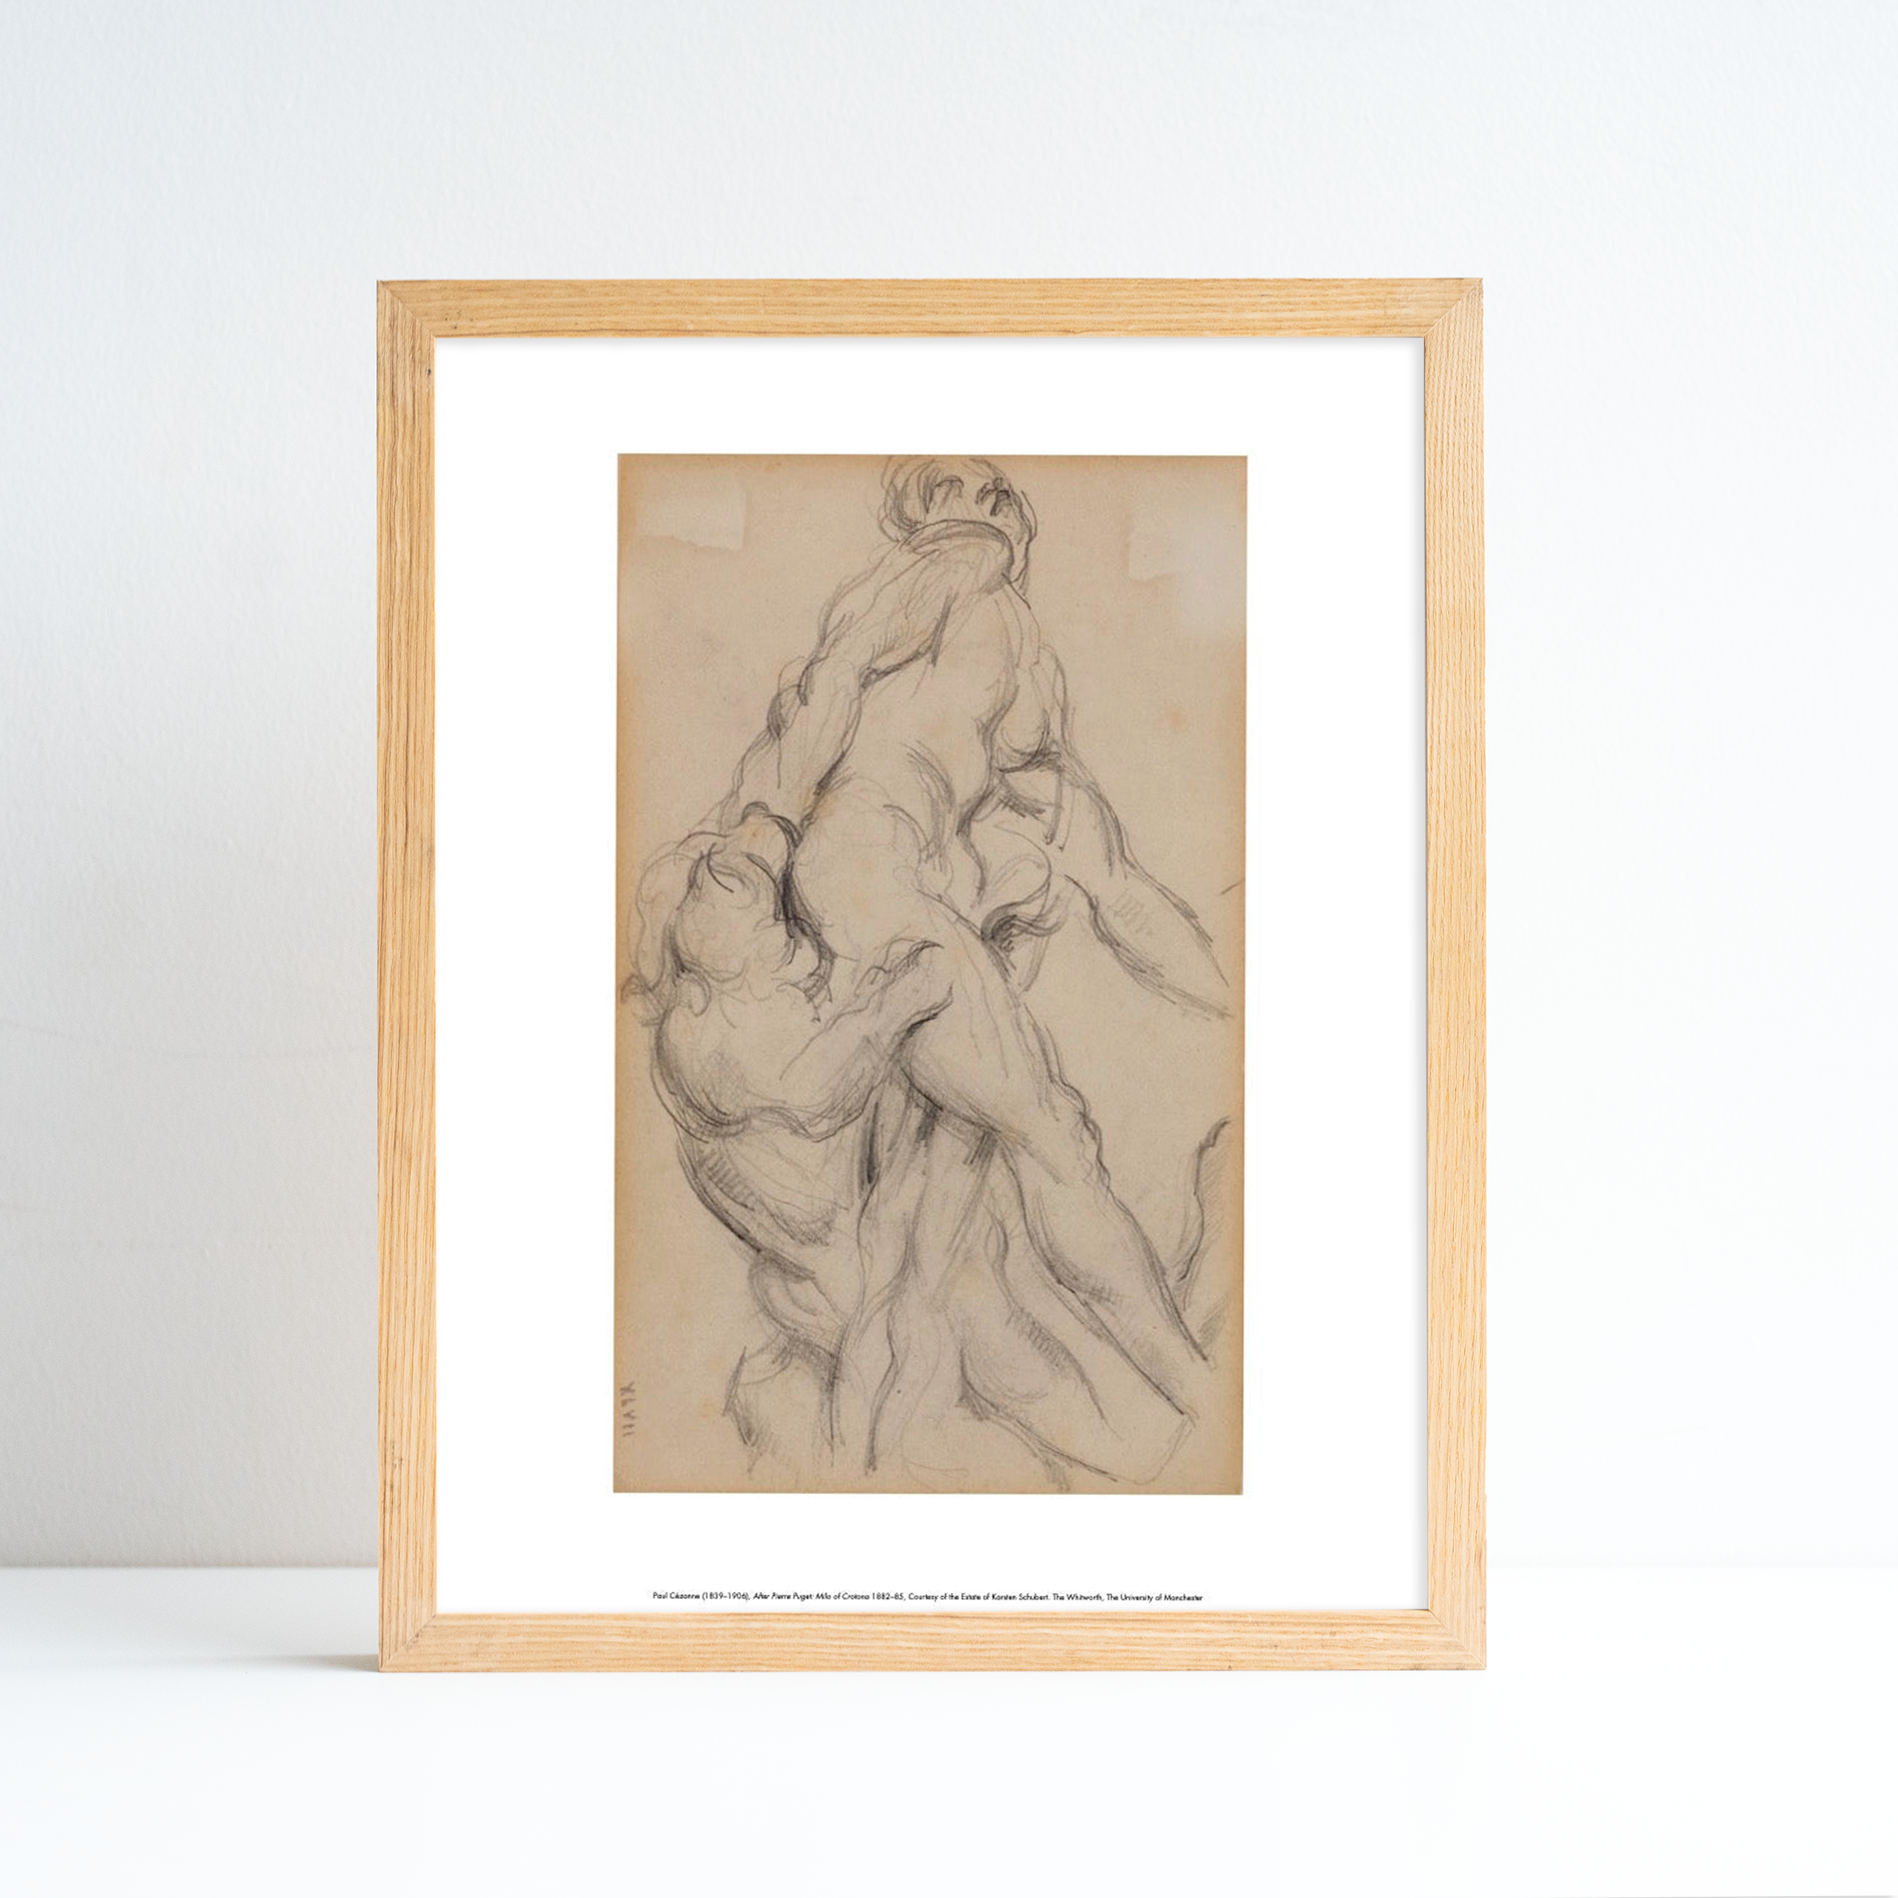 Reproduction of After Pierre Puget by Paul Cezanne in an ash frame against a white background. A drawing featuring nude figures